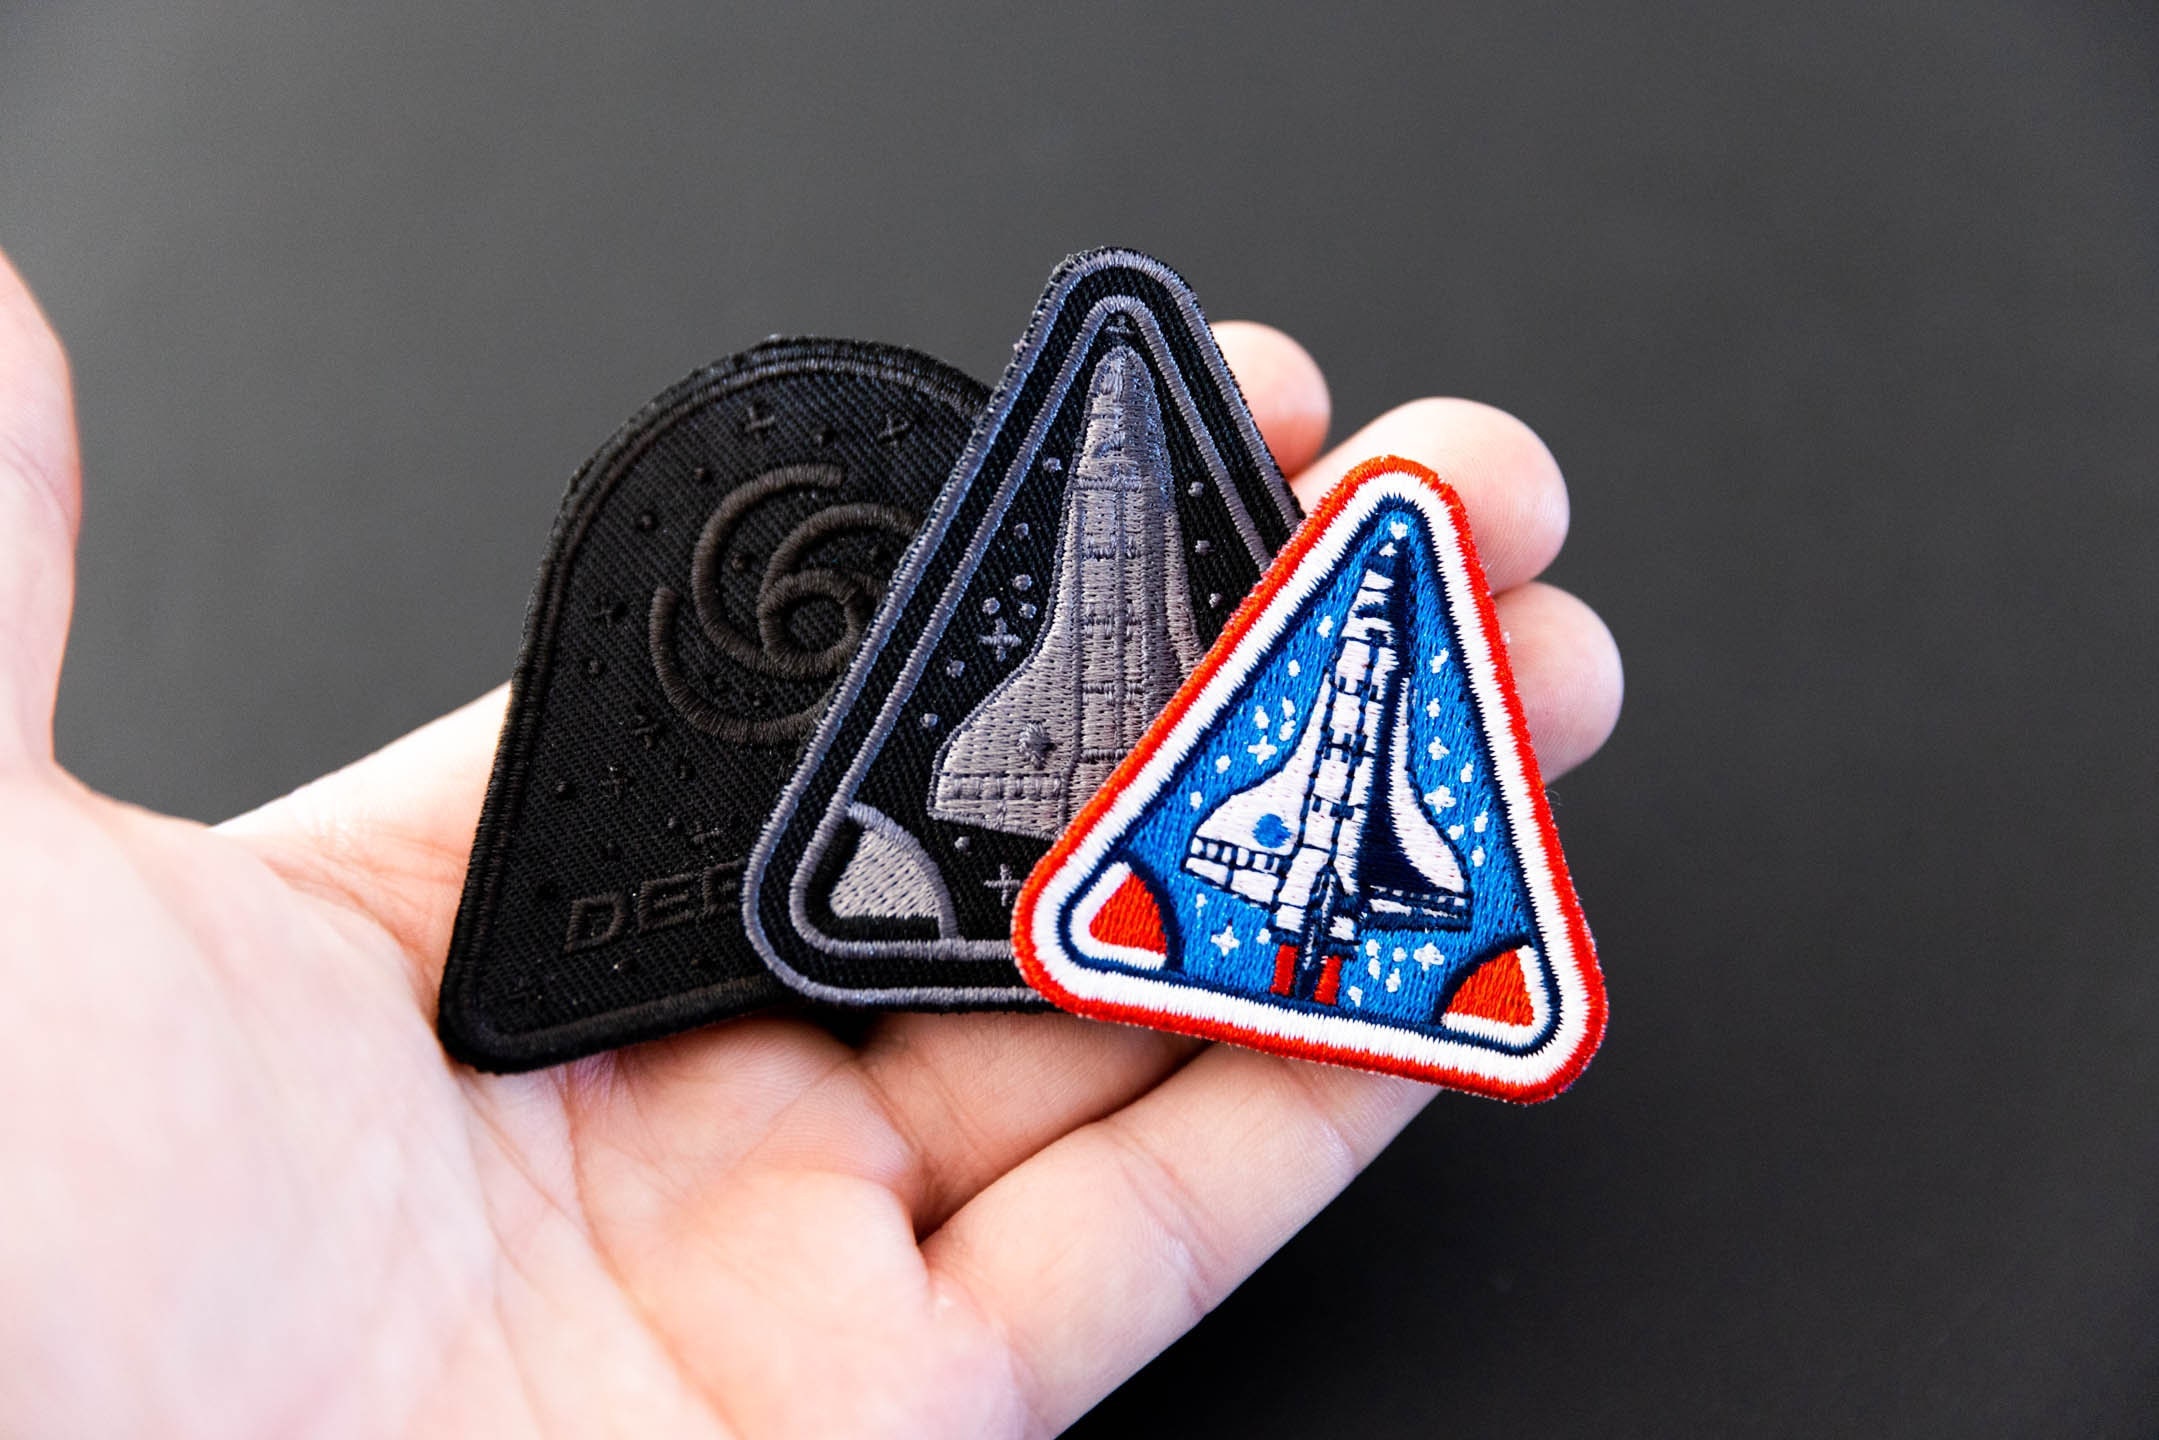 Space Mission Patches 3-pack Space Shuttle, Deep Space, Black Shuttle 